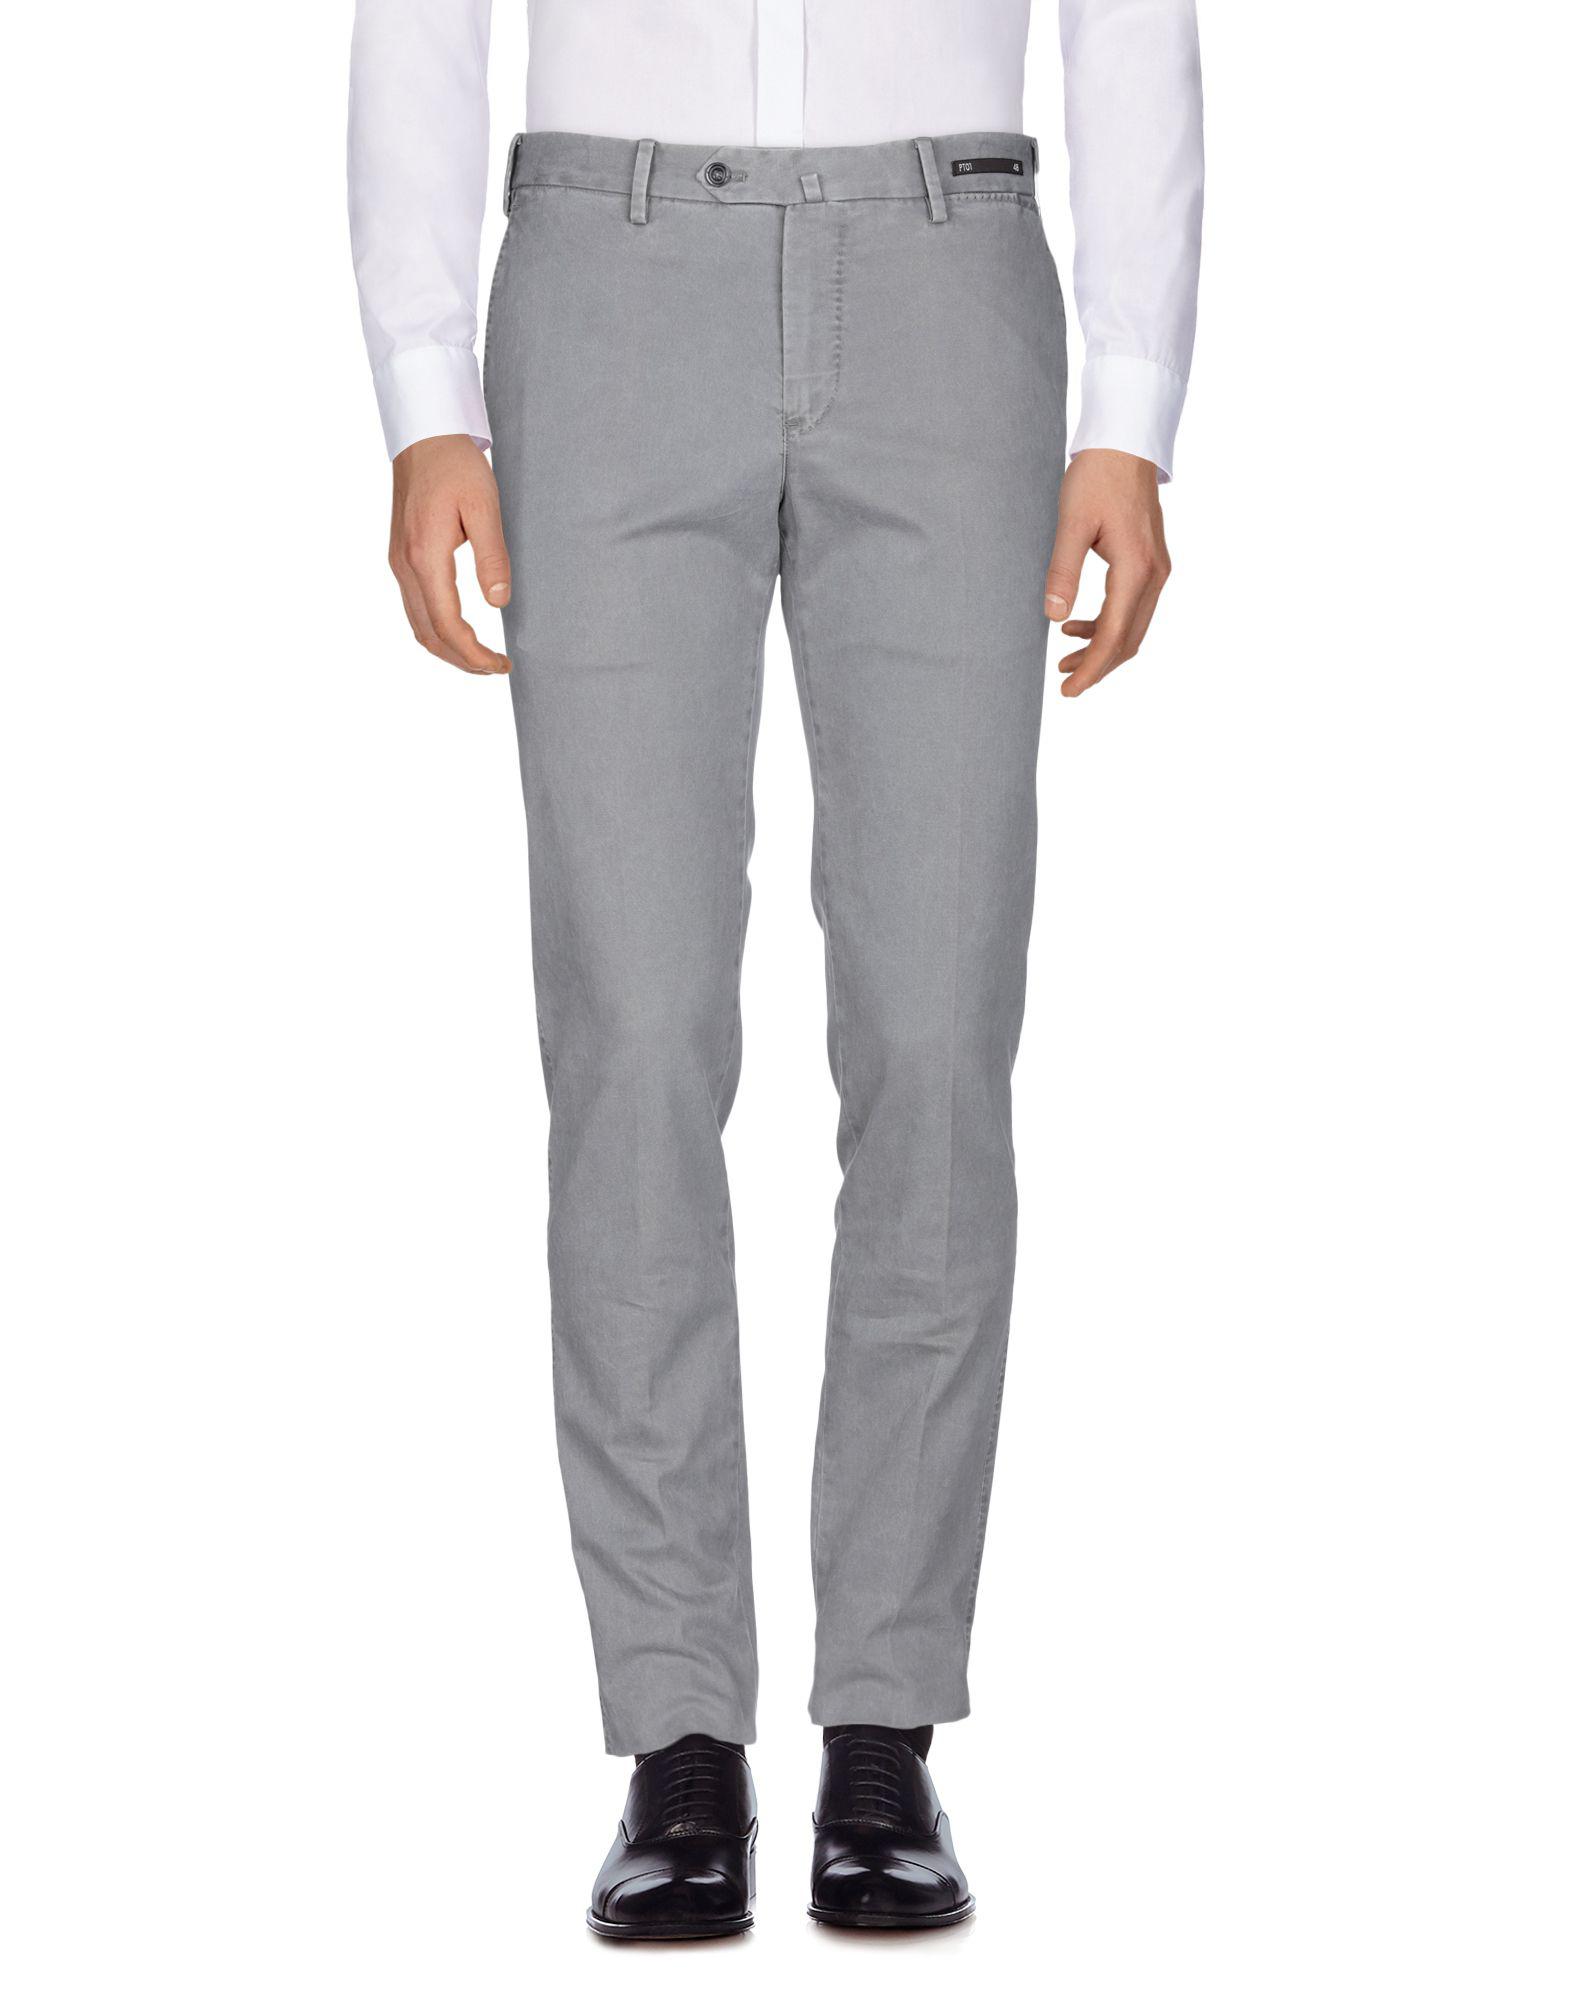 PT01 Cotton Casual Pants in Grey (Gray) for Men - Lyst